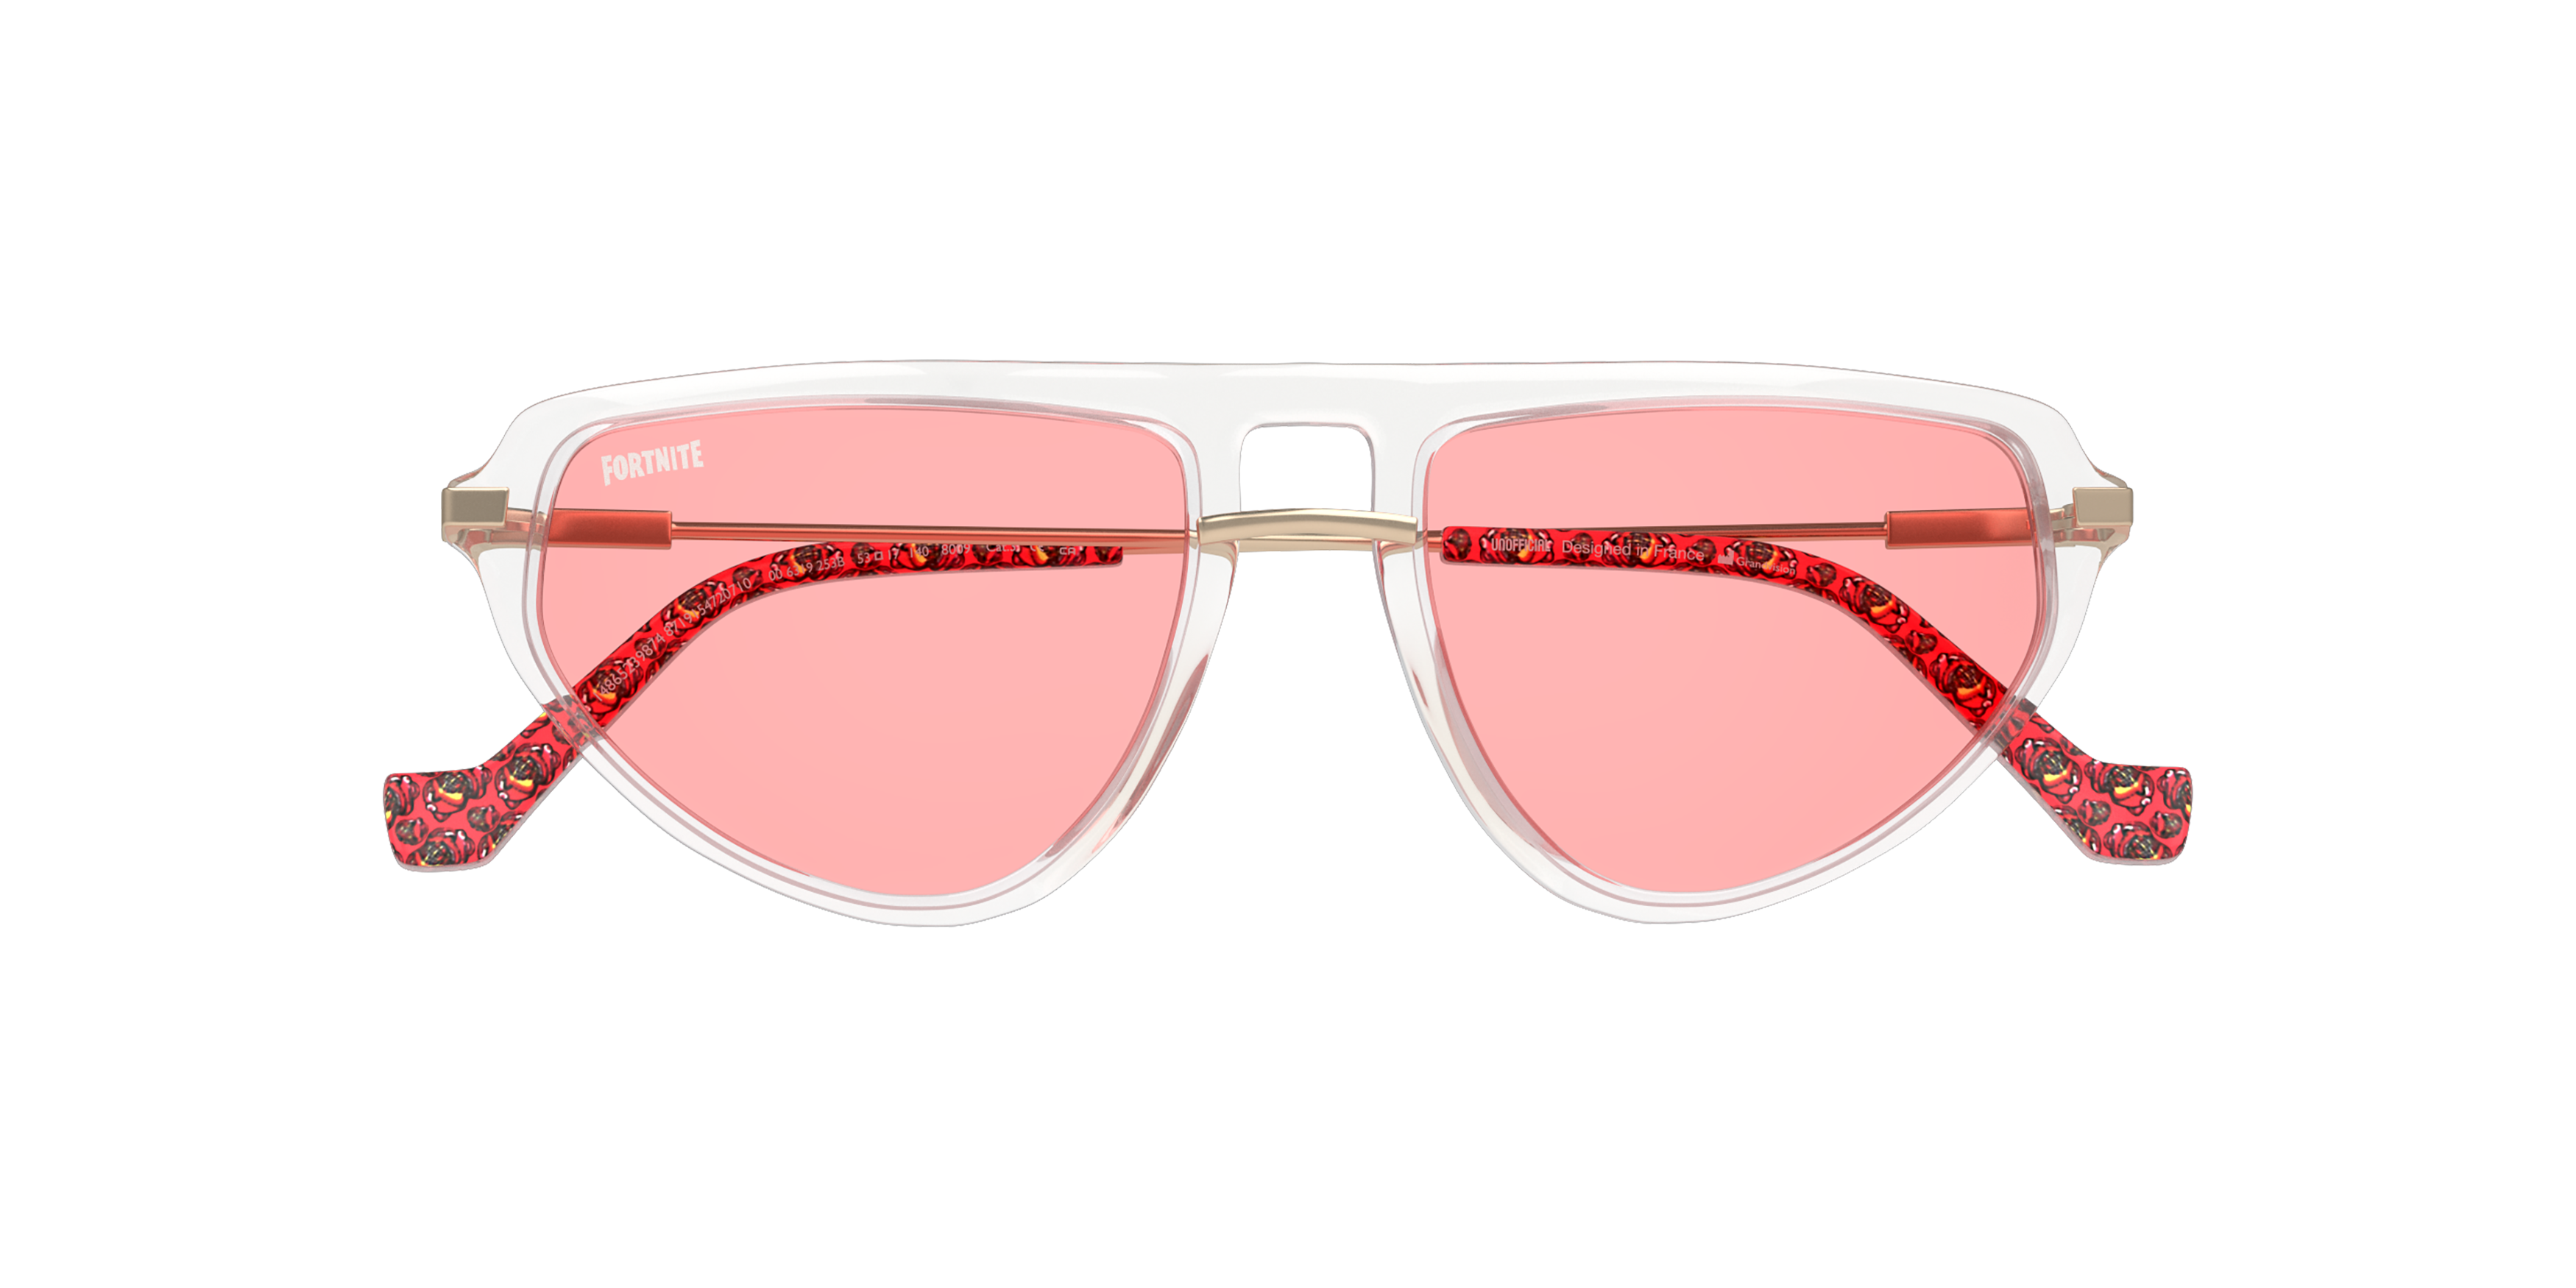 Folded Fortnite with Unofficial UNSU0147 Sunglasses Pink / Transparent, Clear